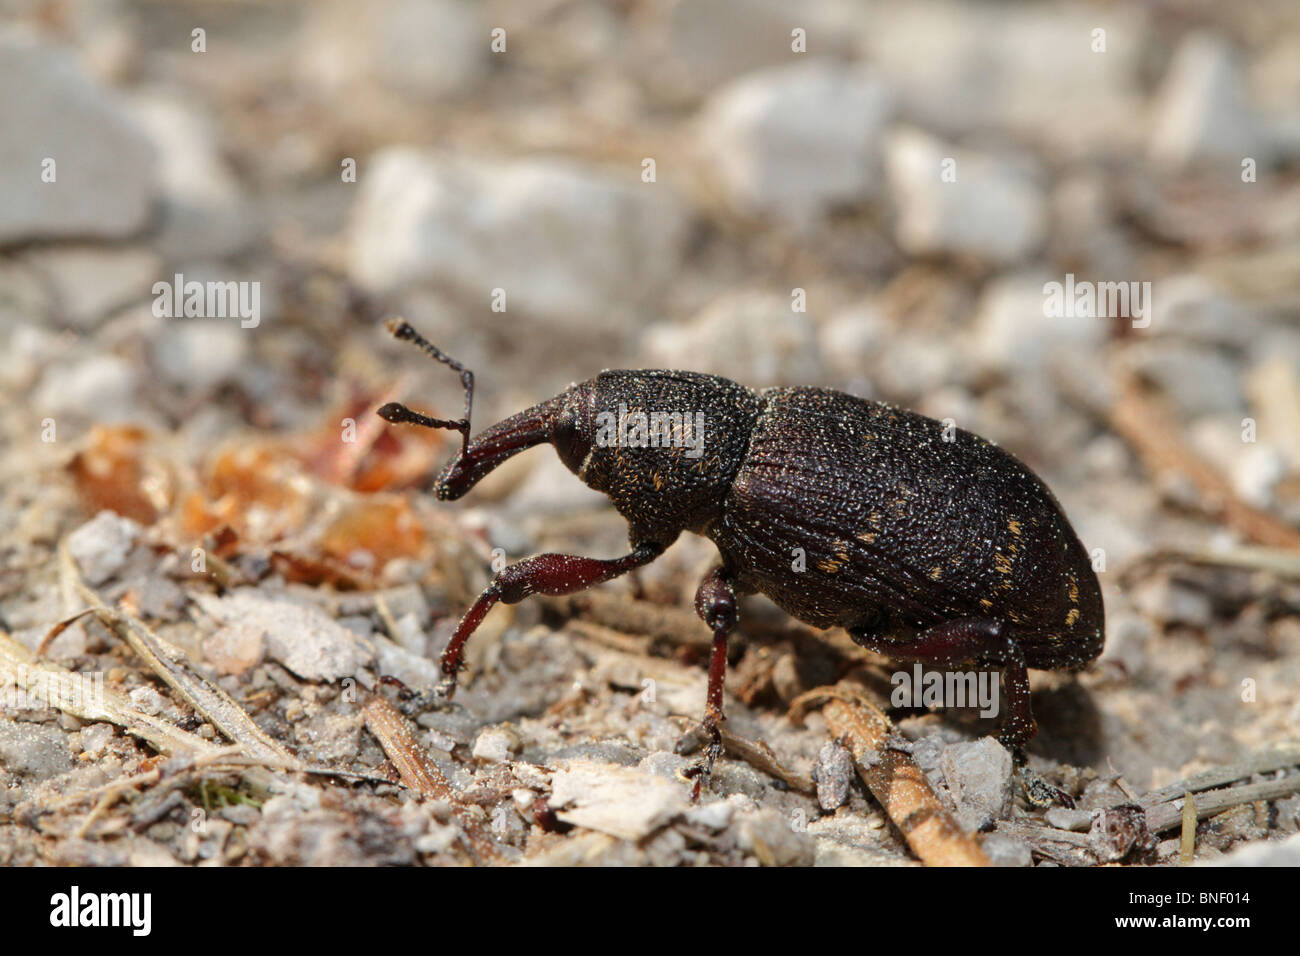 Hylobius abietis, pine weevil. A weevil or snout beetle on a dirt road through a pine forest Stock Photo